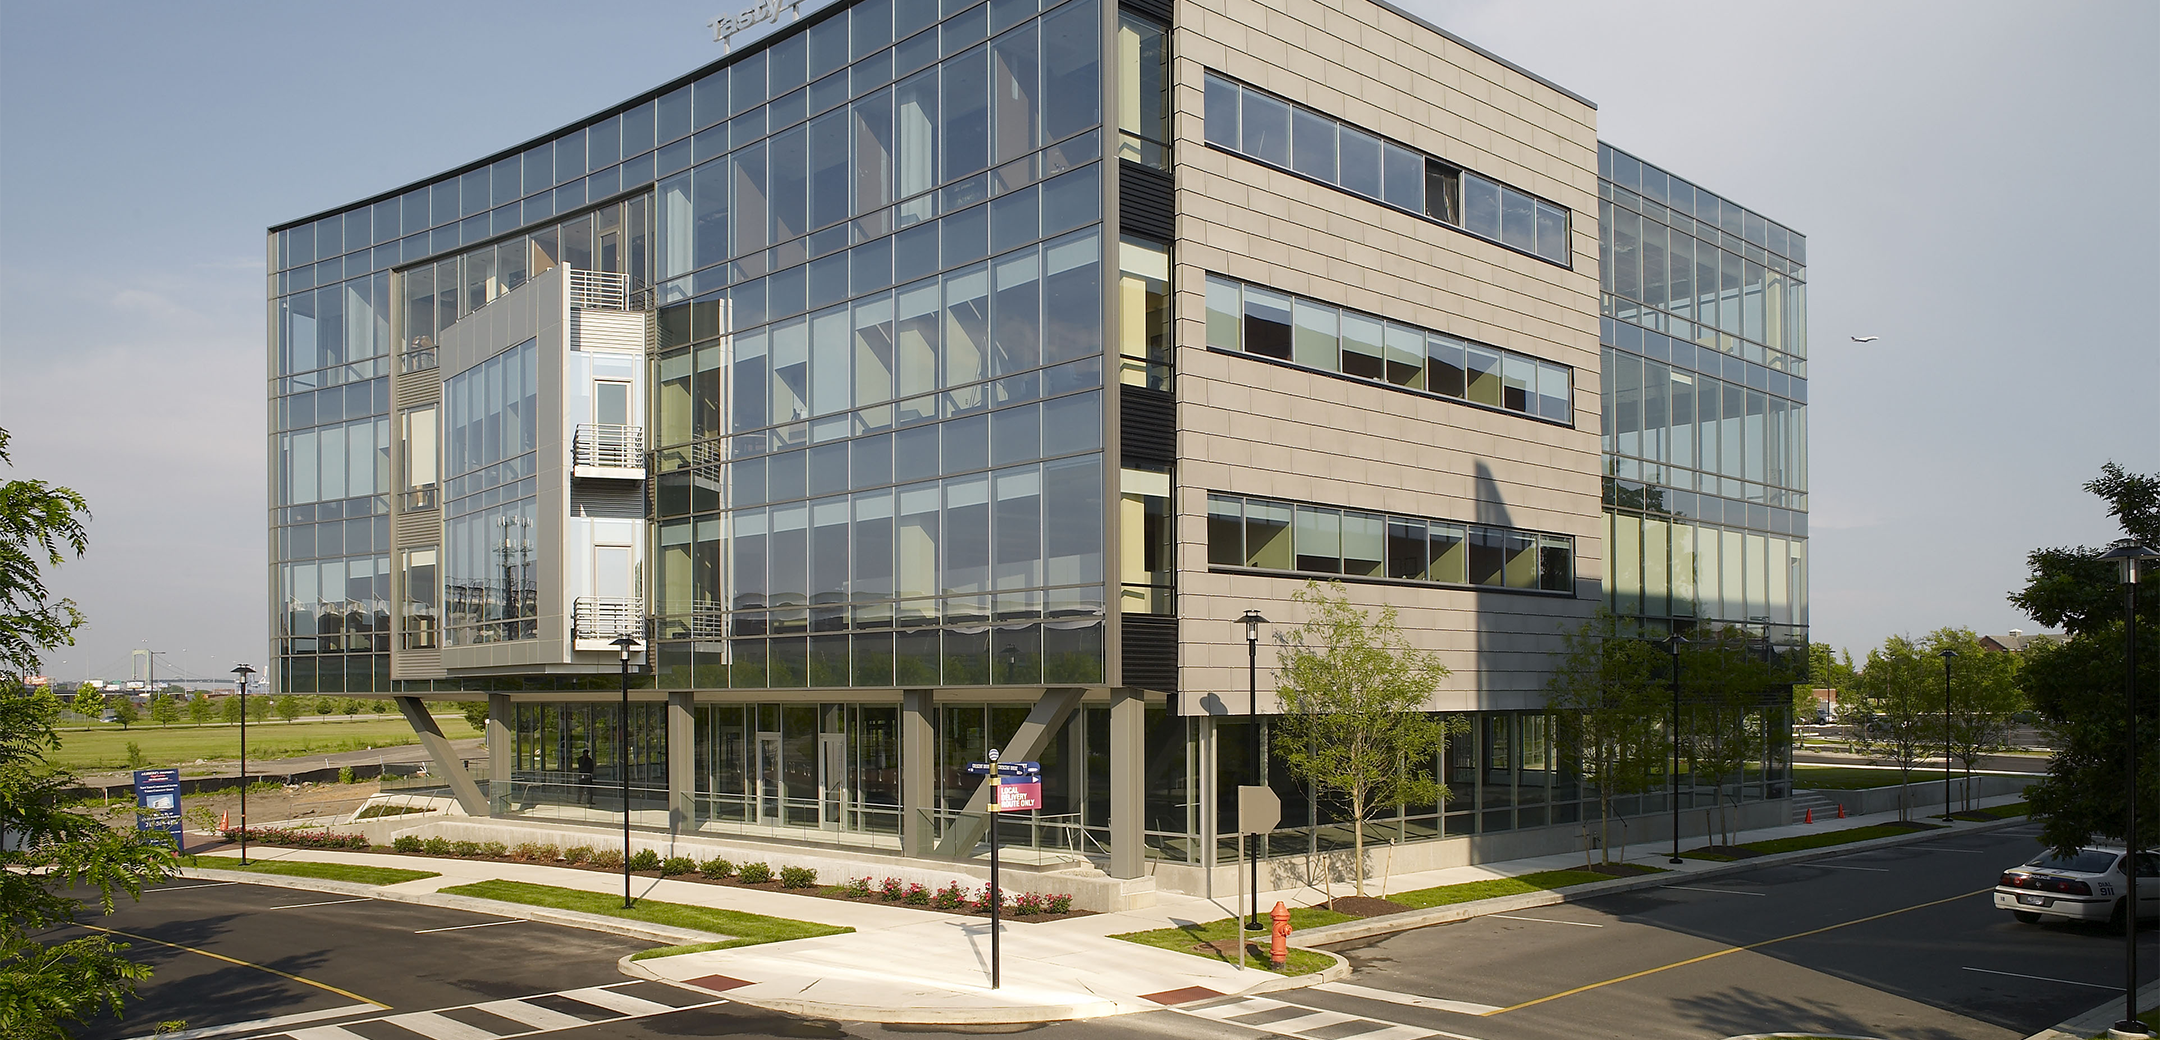 A view of a 4-story Tasty Baking company headquarters building with a full glass wall layering the front side, showcasing the street parking and intersection.